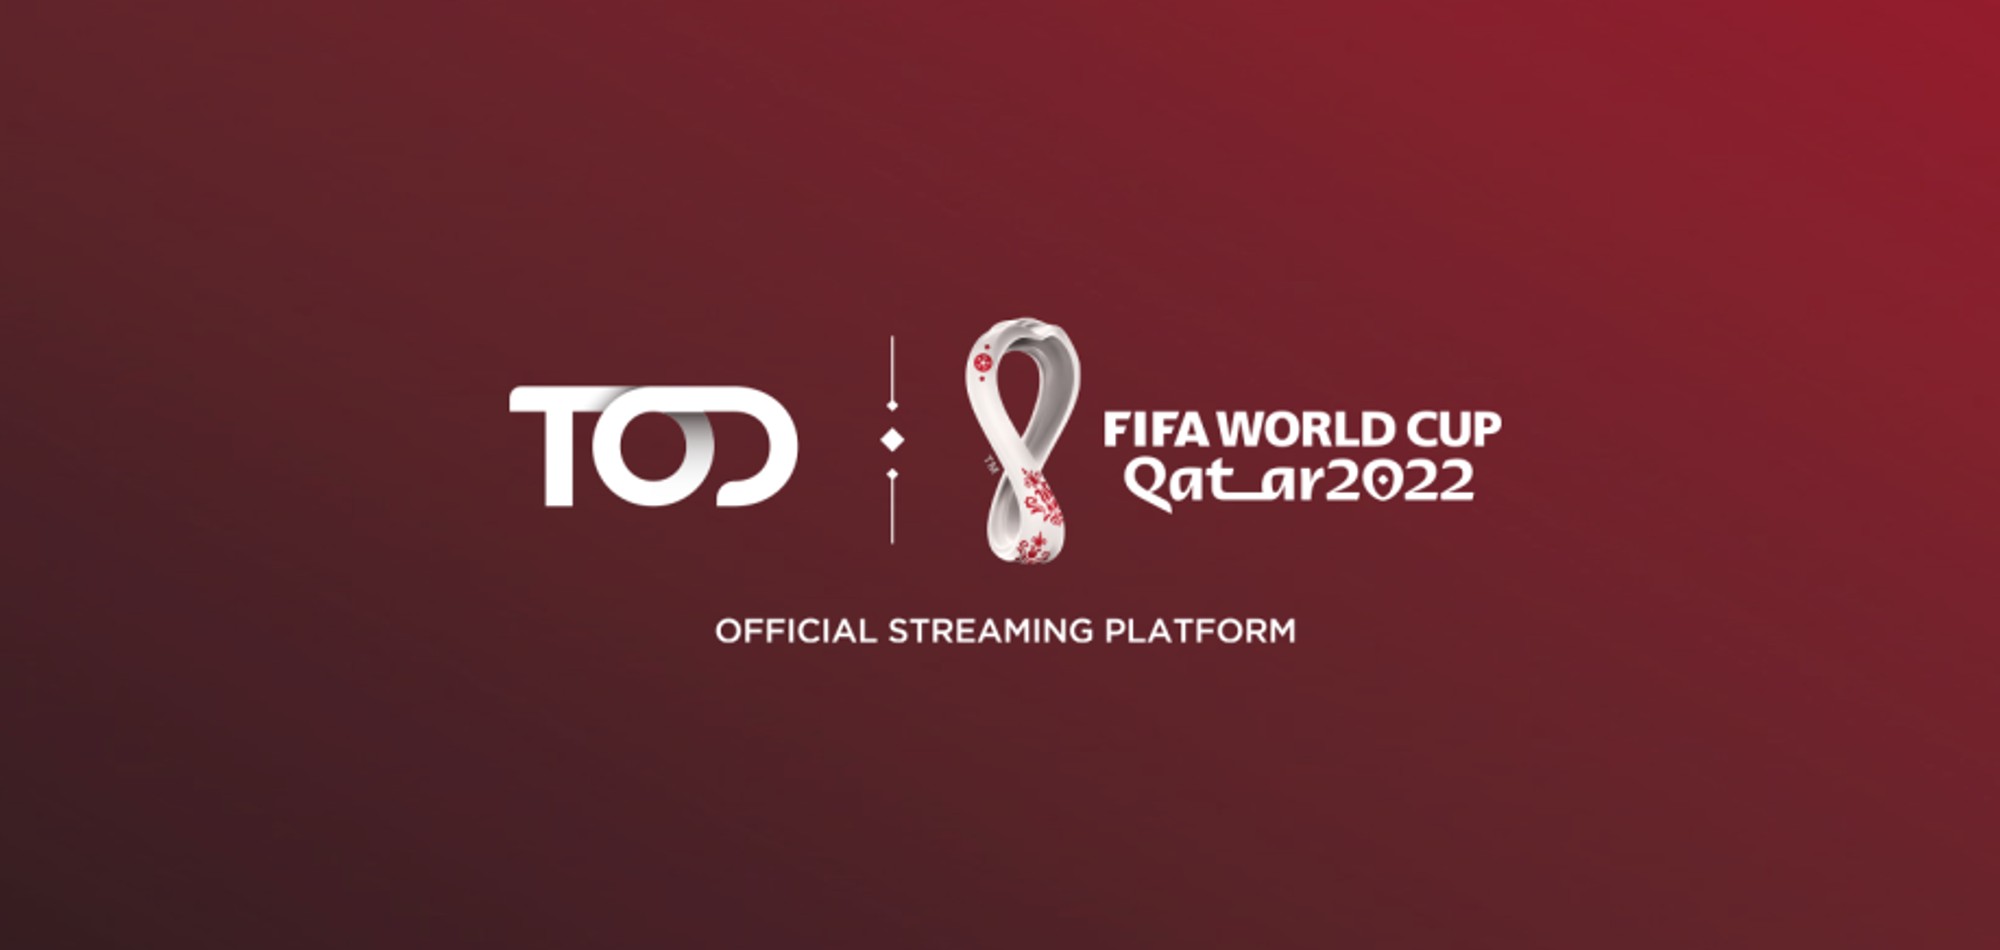 TOD announced as exclusive OTT streaming platform for Qatar 2022